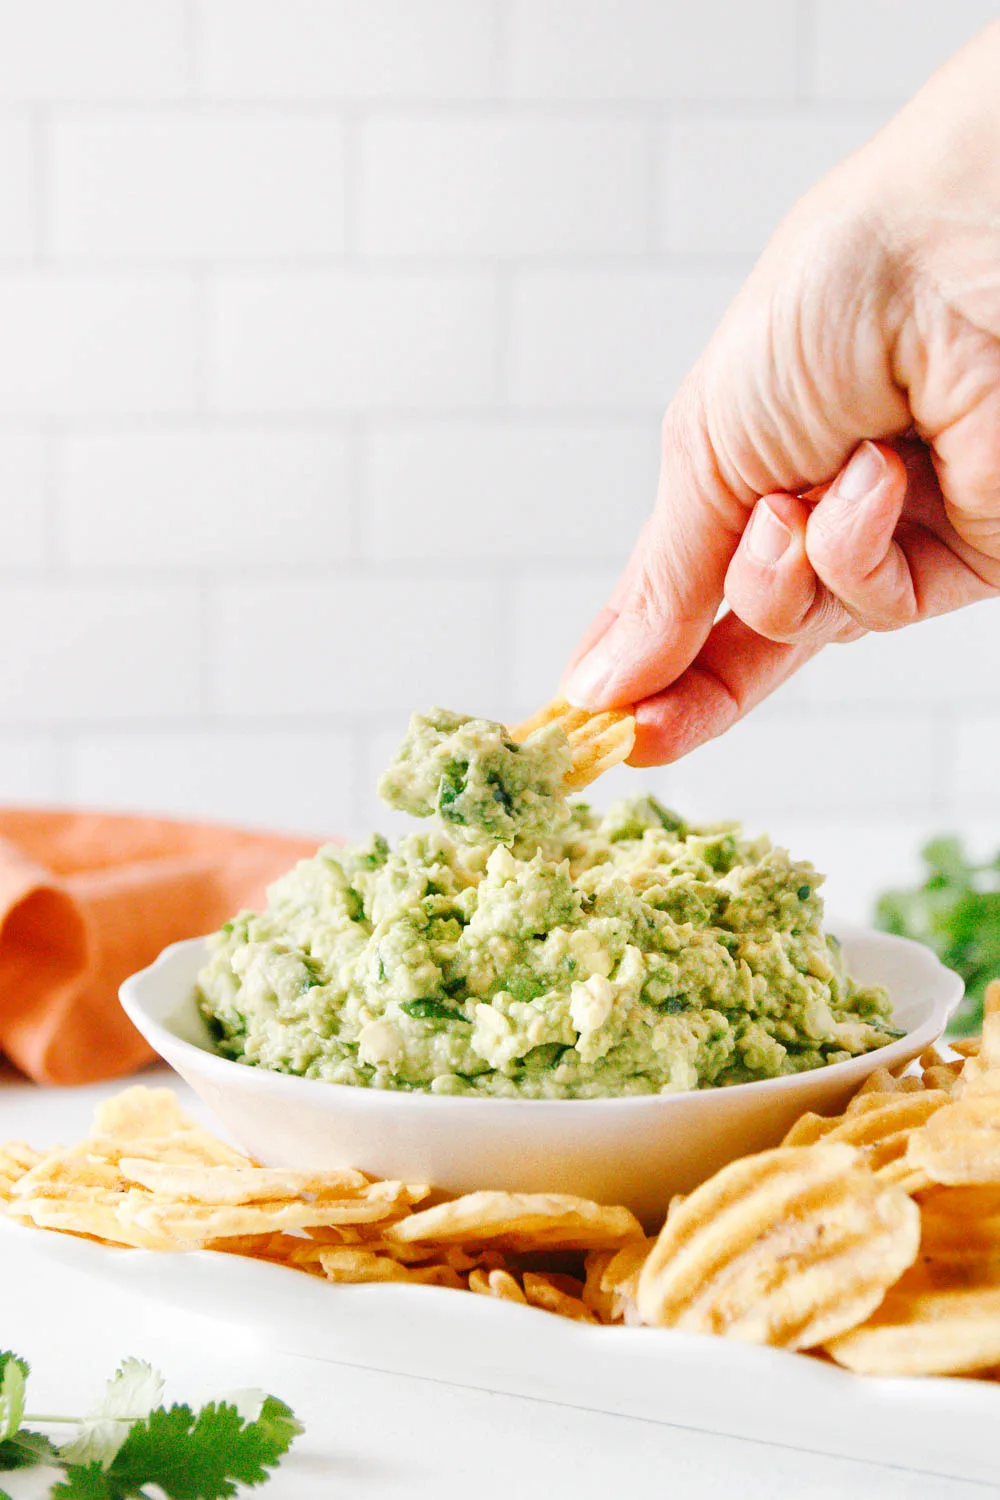 hand dipping a chip into the bowl to scoop some guacamole